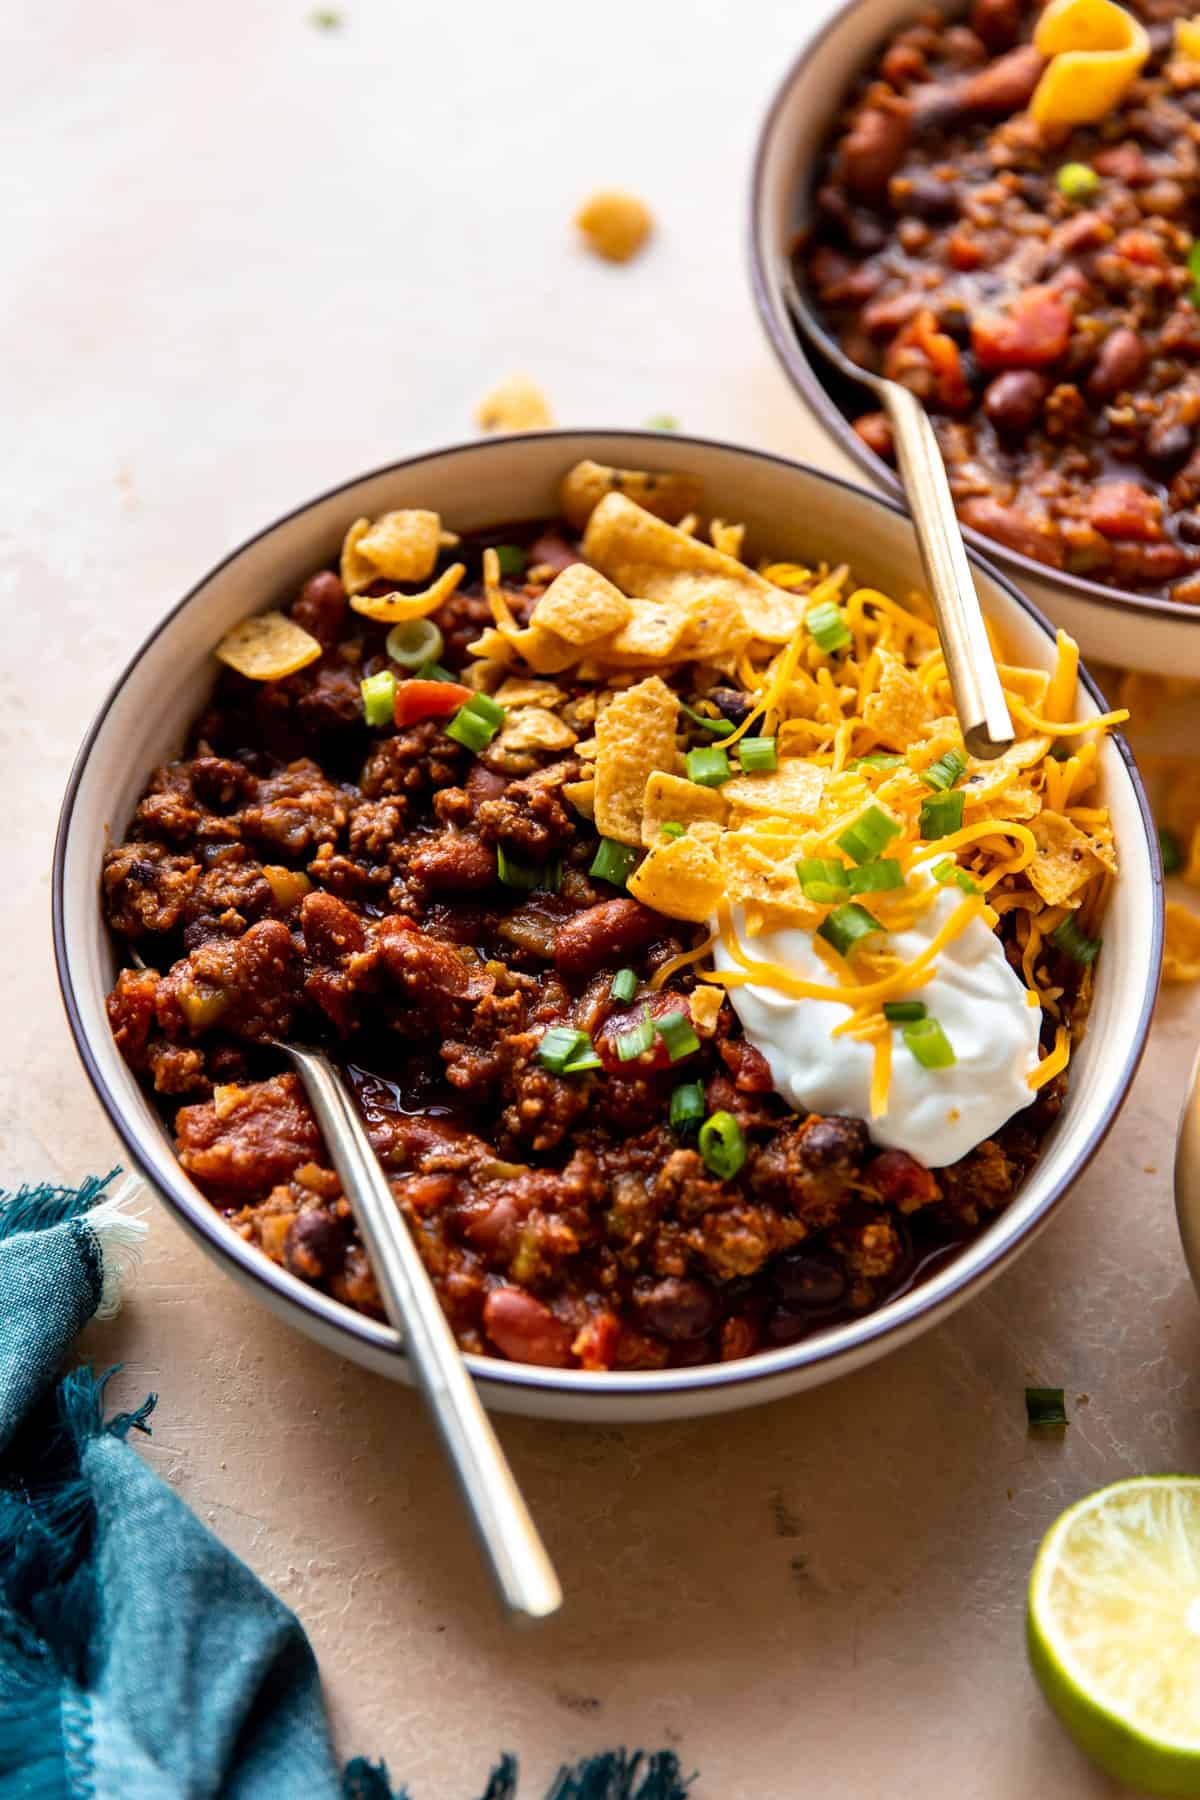 Image of Chili companion cup of chili with tortilla chips